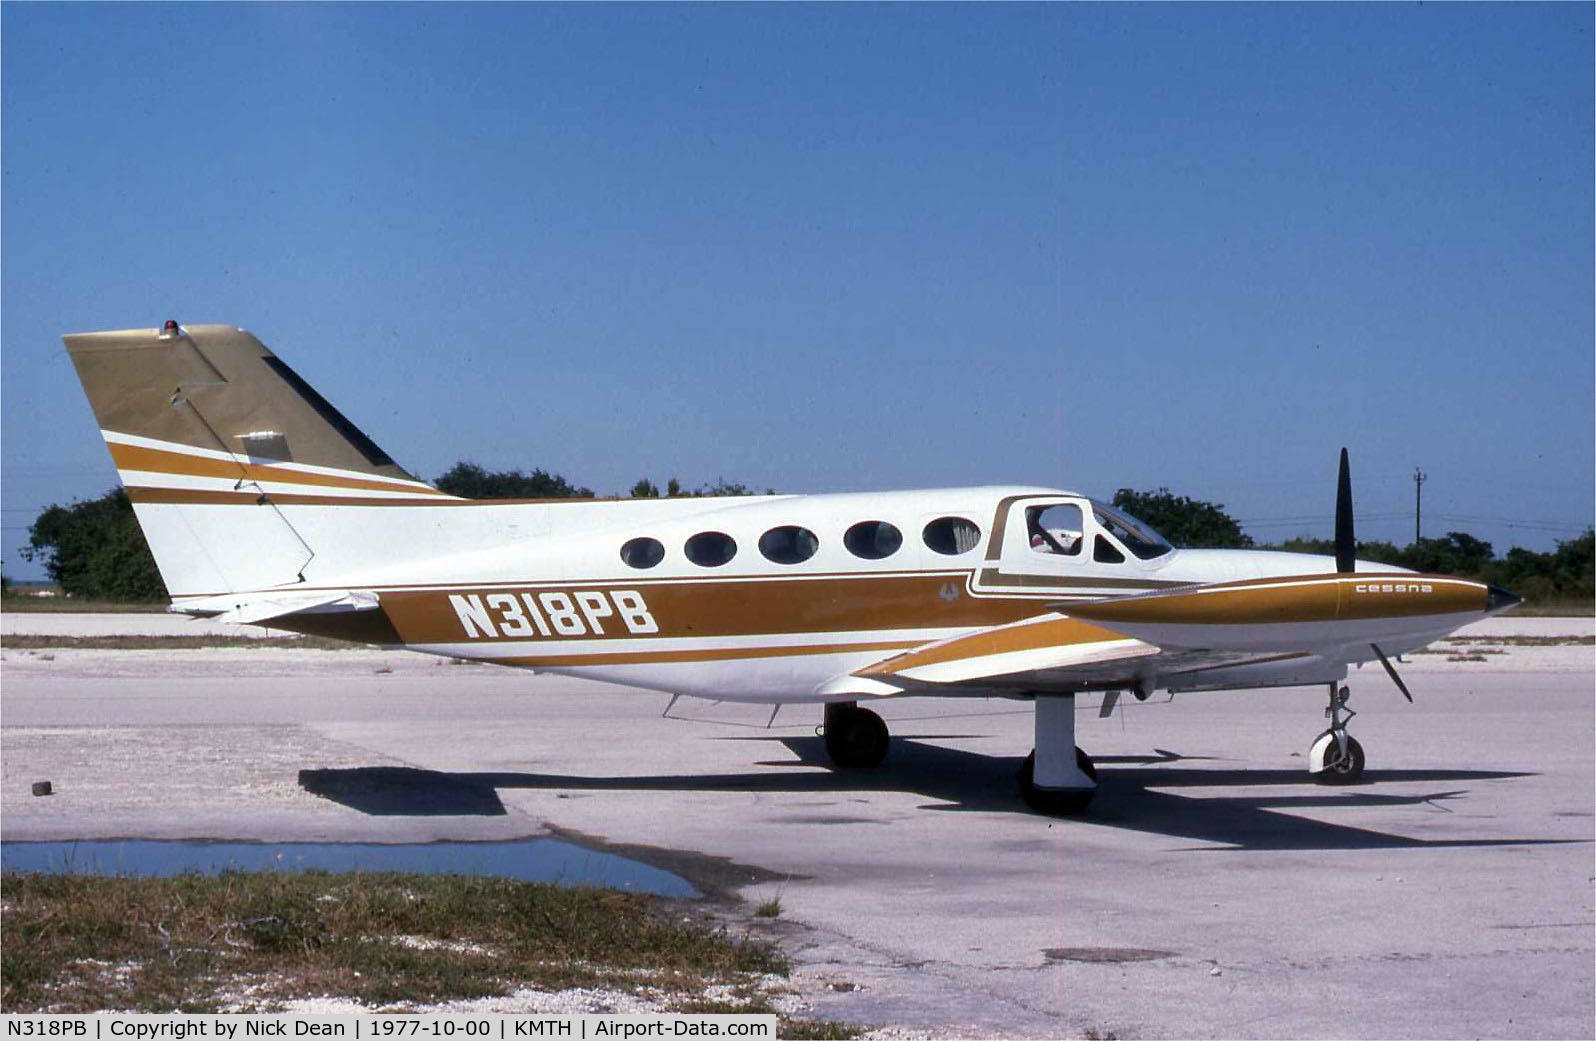 N318PB, 1973 Cessna 421B Golden Eagle C/N 421B0427, Clearly not a Bell 412 30 years ago C/N 421B-0427